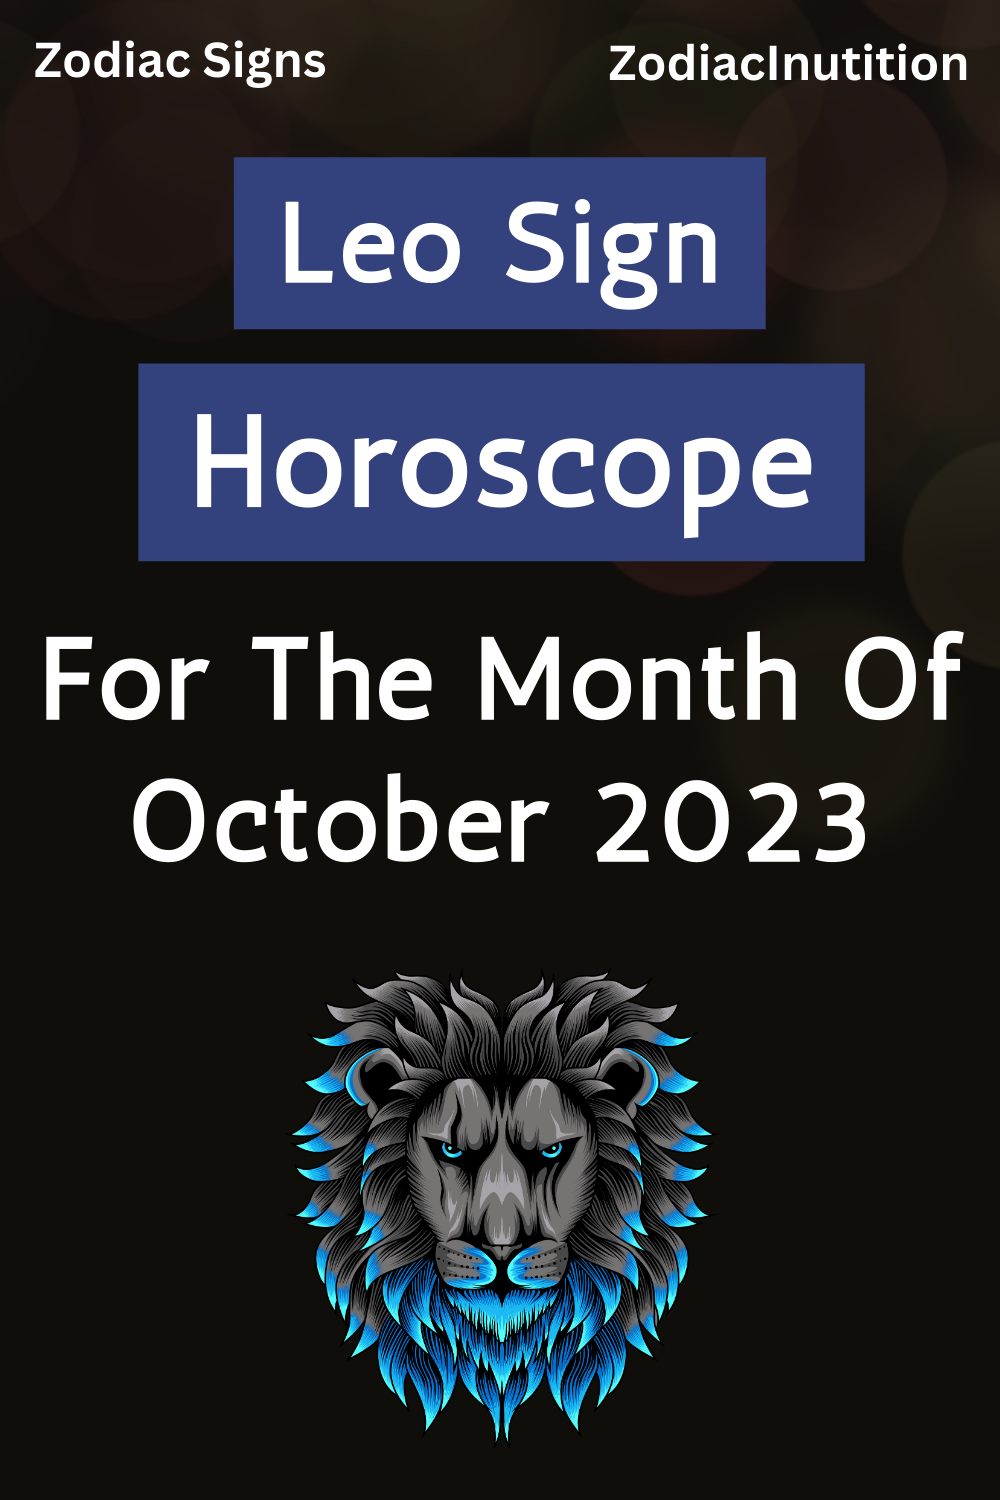 Leo: Horoscope For The Month Of October 2023